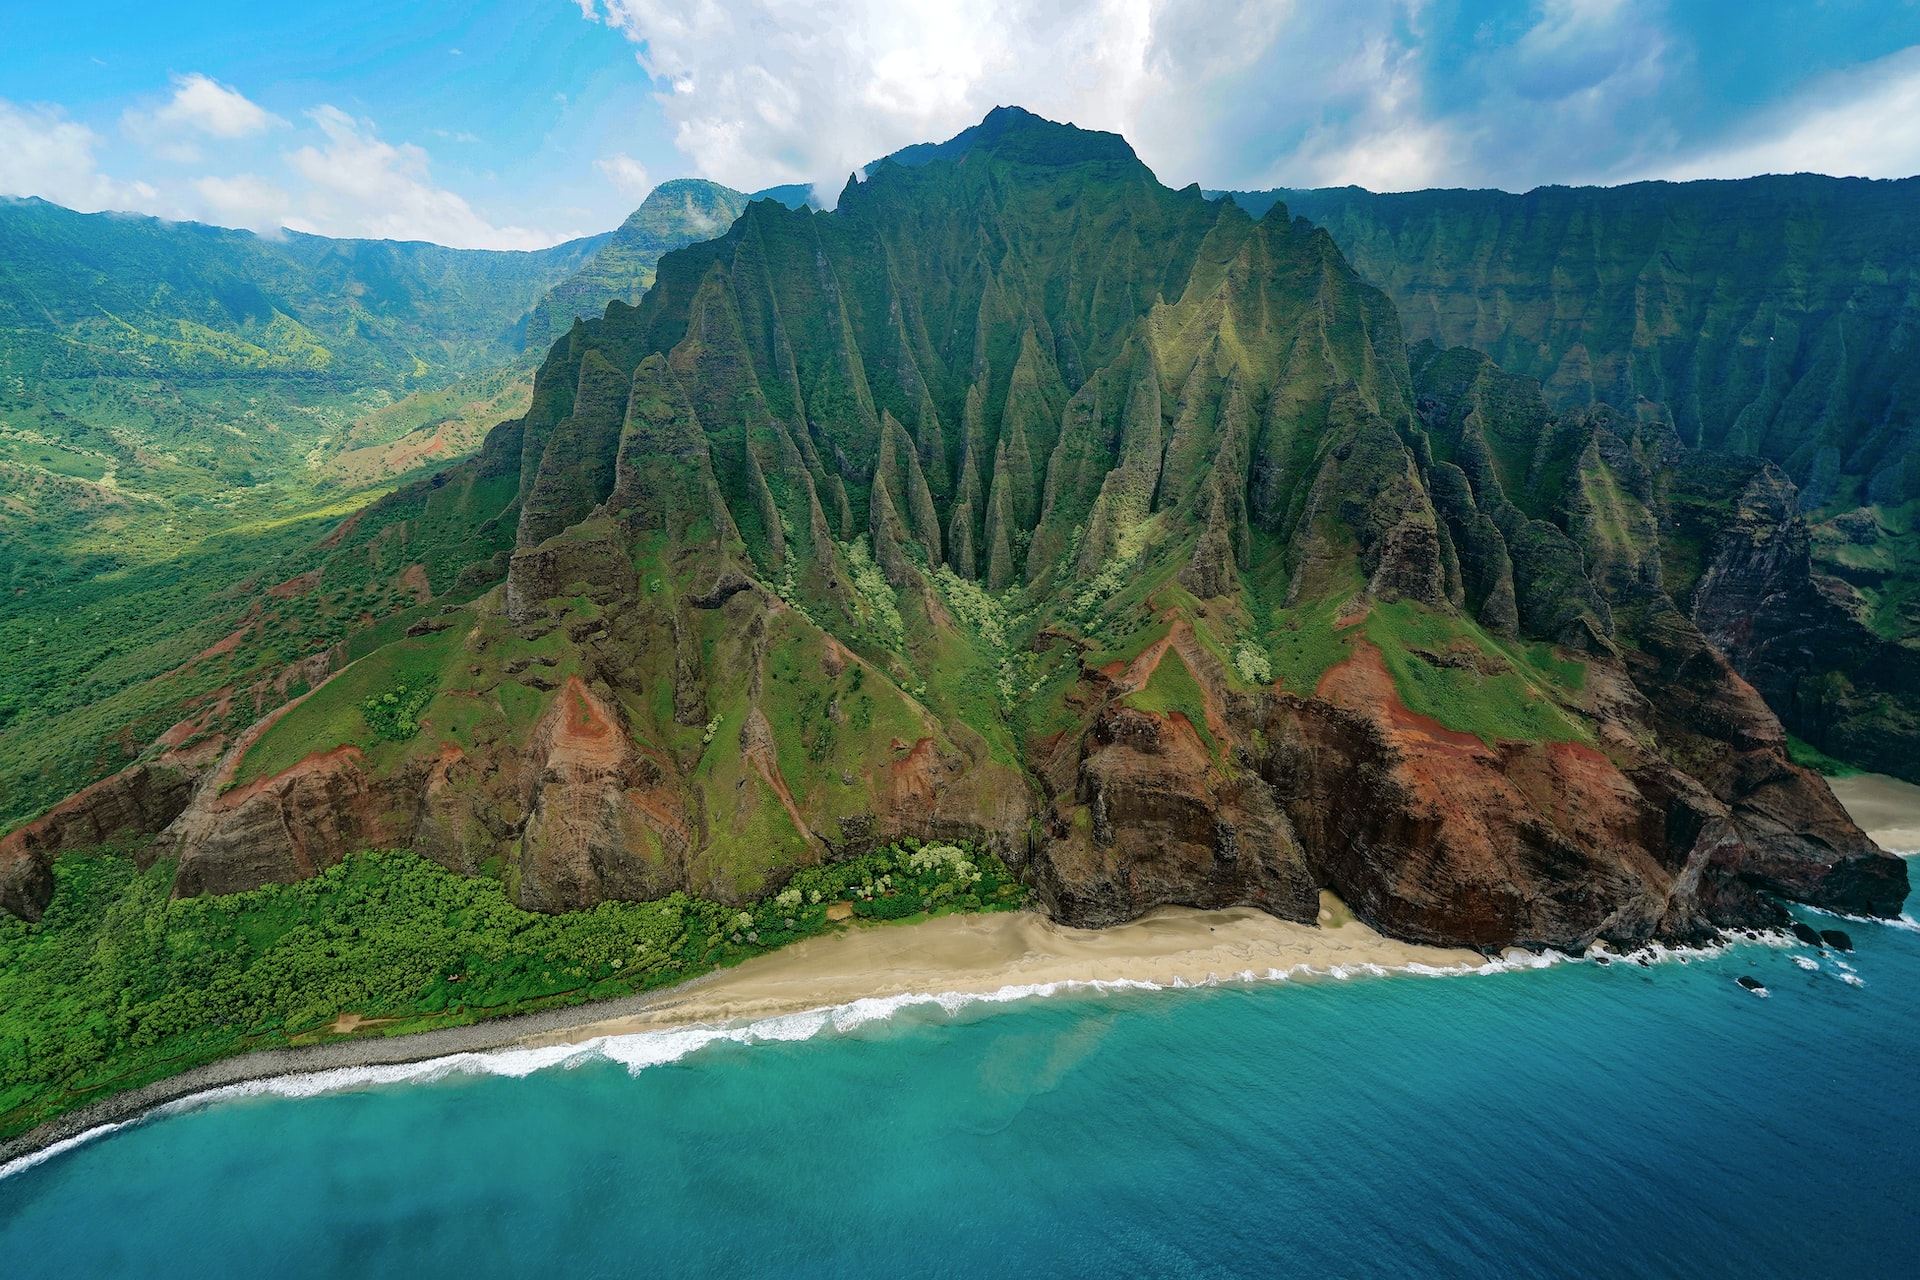 Helicopter view of one of the most amazing landscapes of the planet. The Nā Pali coast on the island of Kauai, Hawaii.